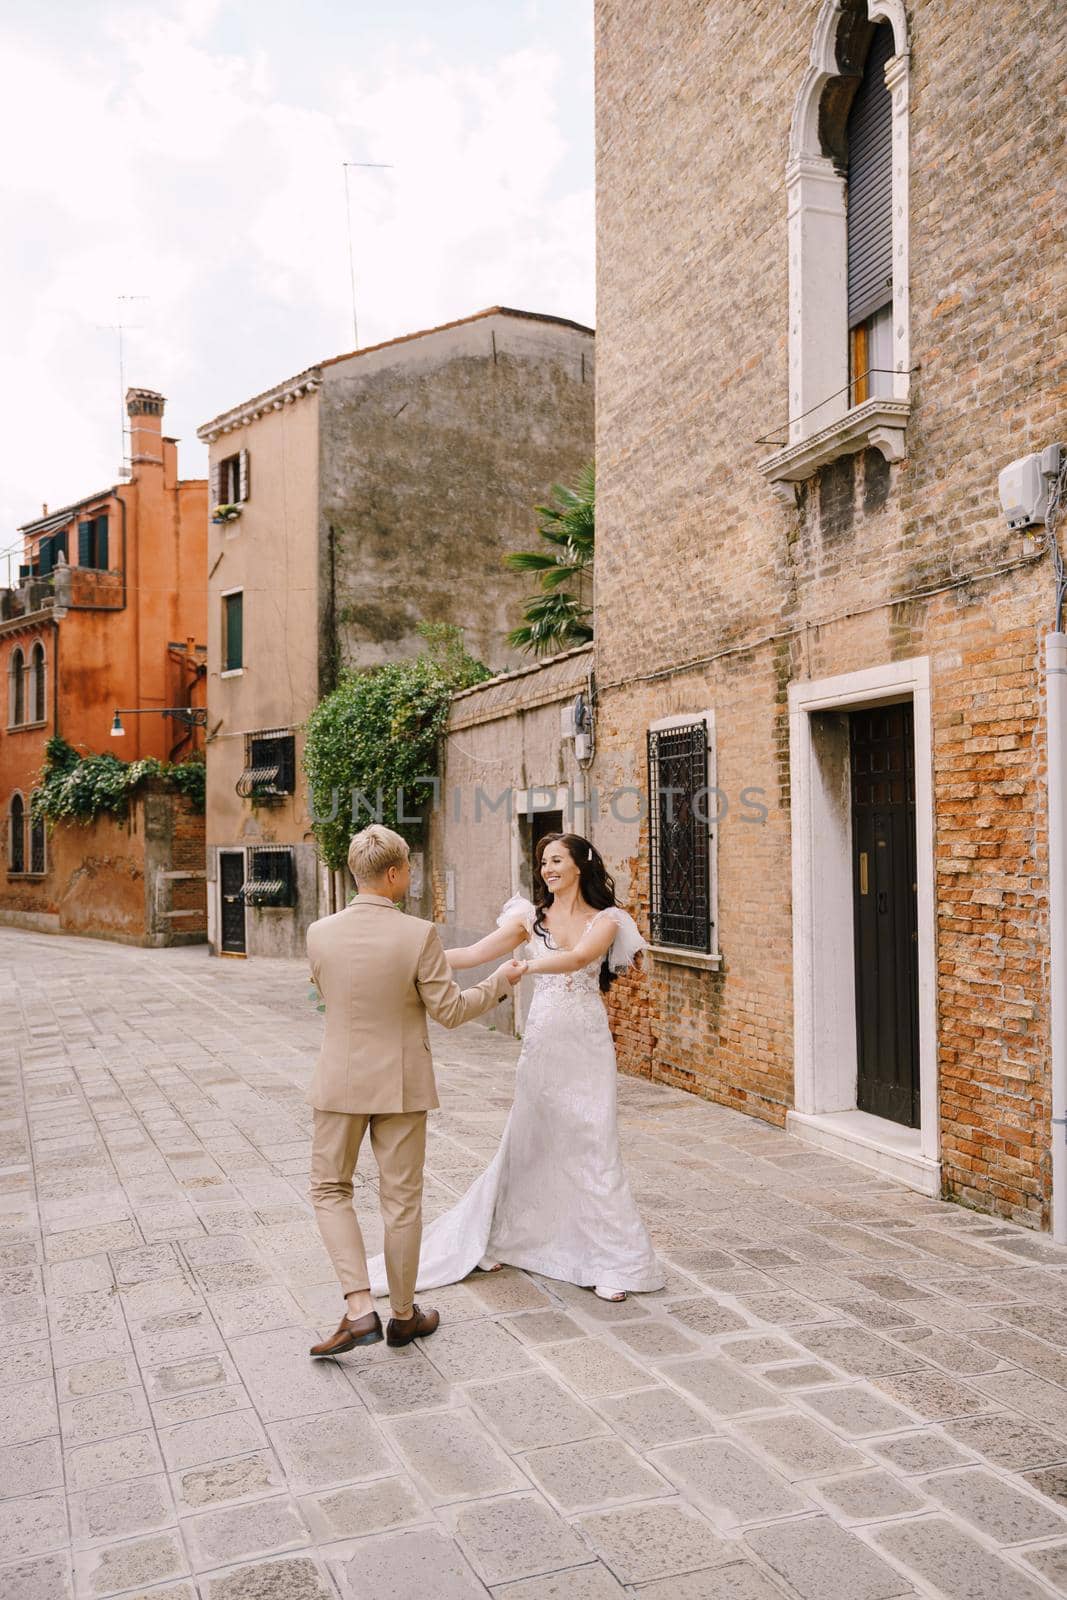 The bride and groom walk through the deserted streets of the city. Newlyweds hug, dance, hold hands against the backdrop of picturesque red brick houses.